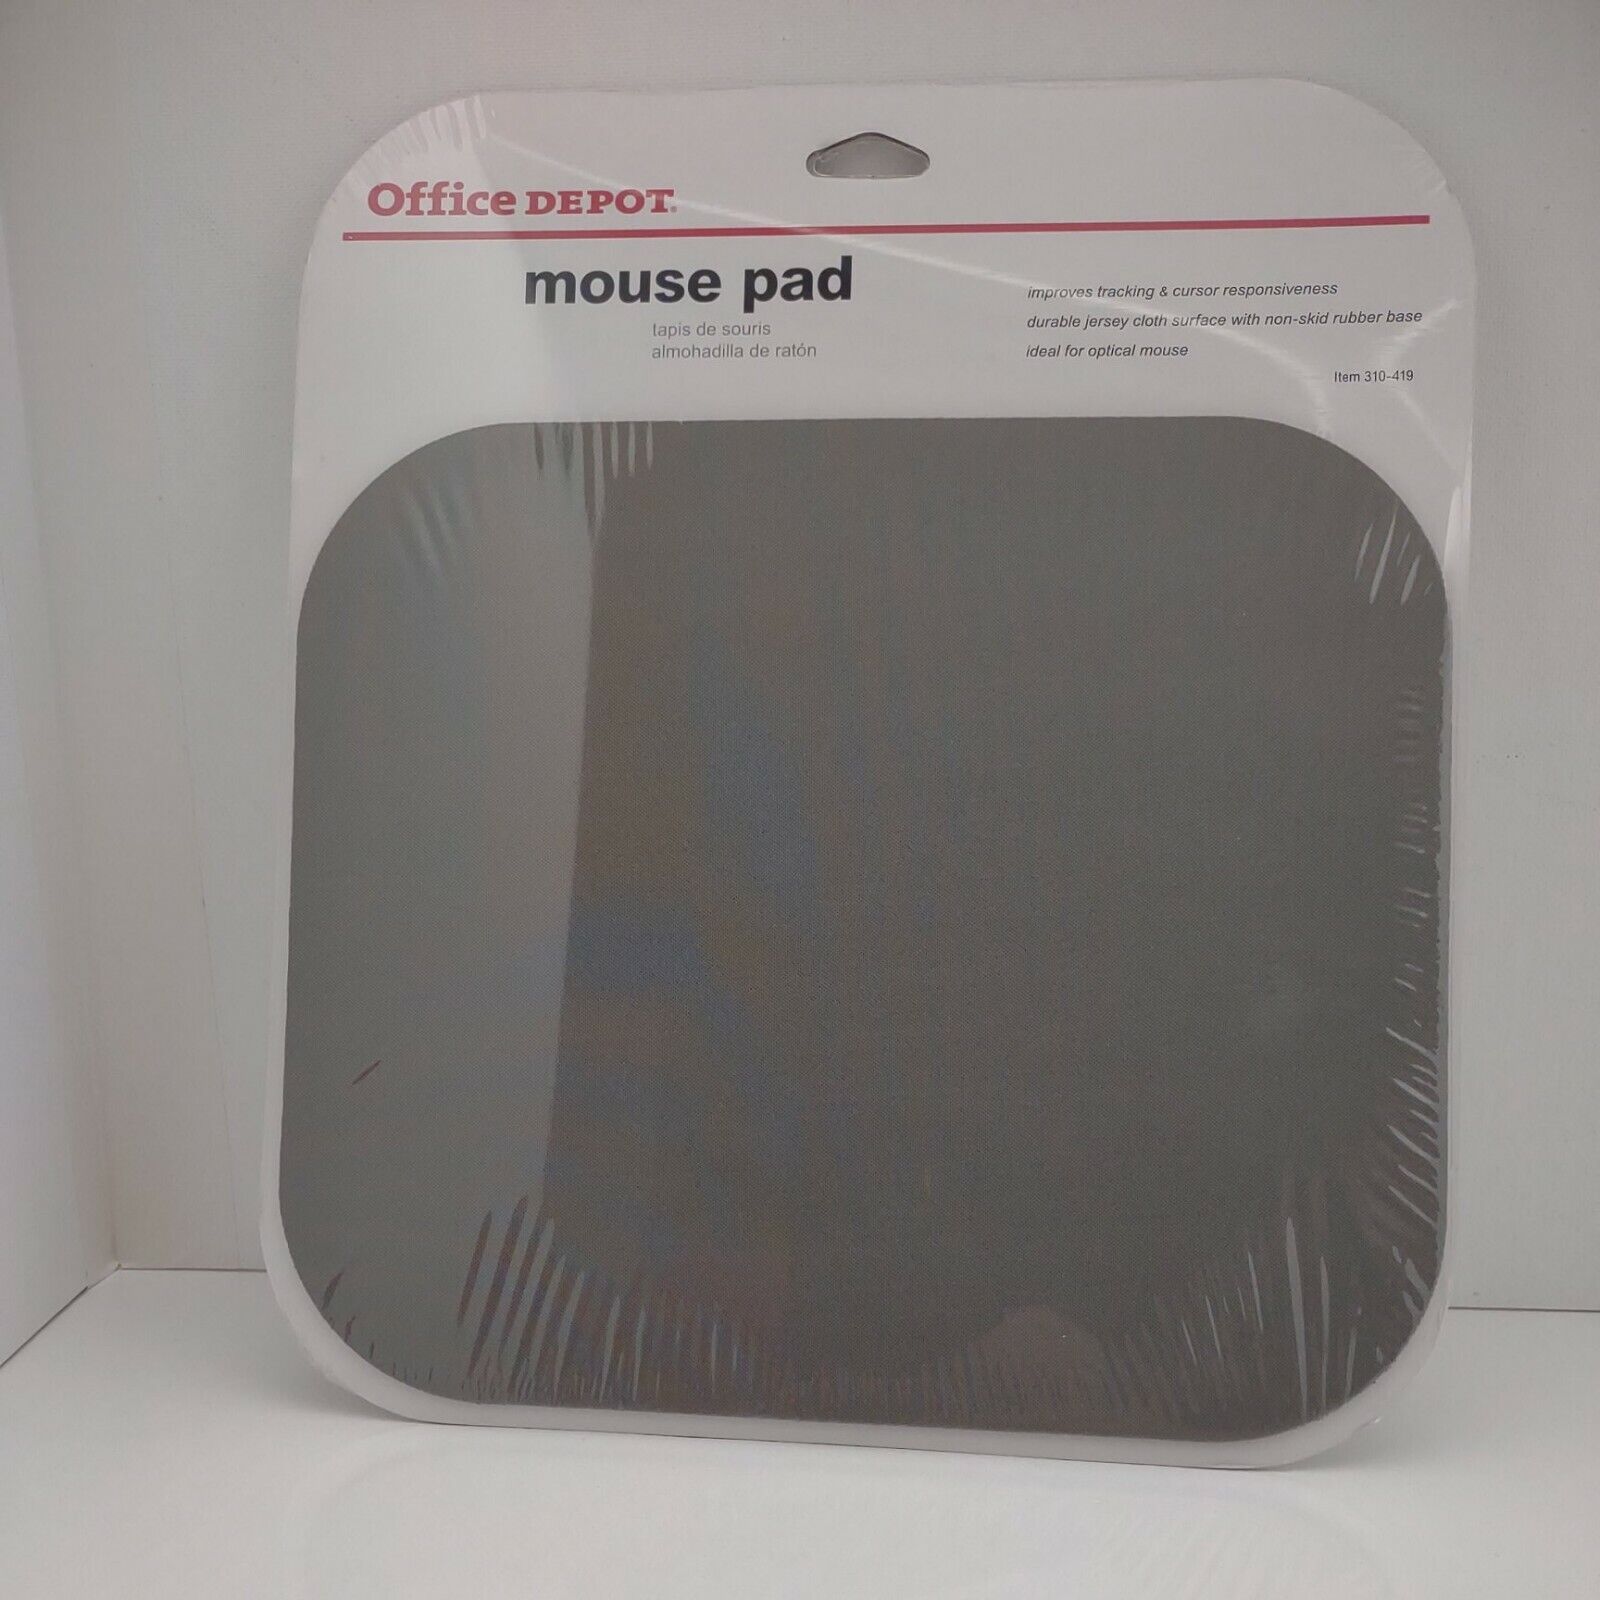 Office Depot MAUSE PAD GRAY IDEAL FOR OPTICAL MOUSE NO-SKID RUBBER BASE.The last